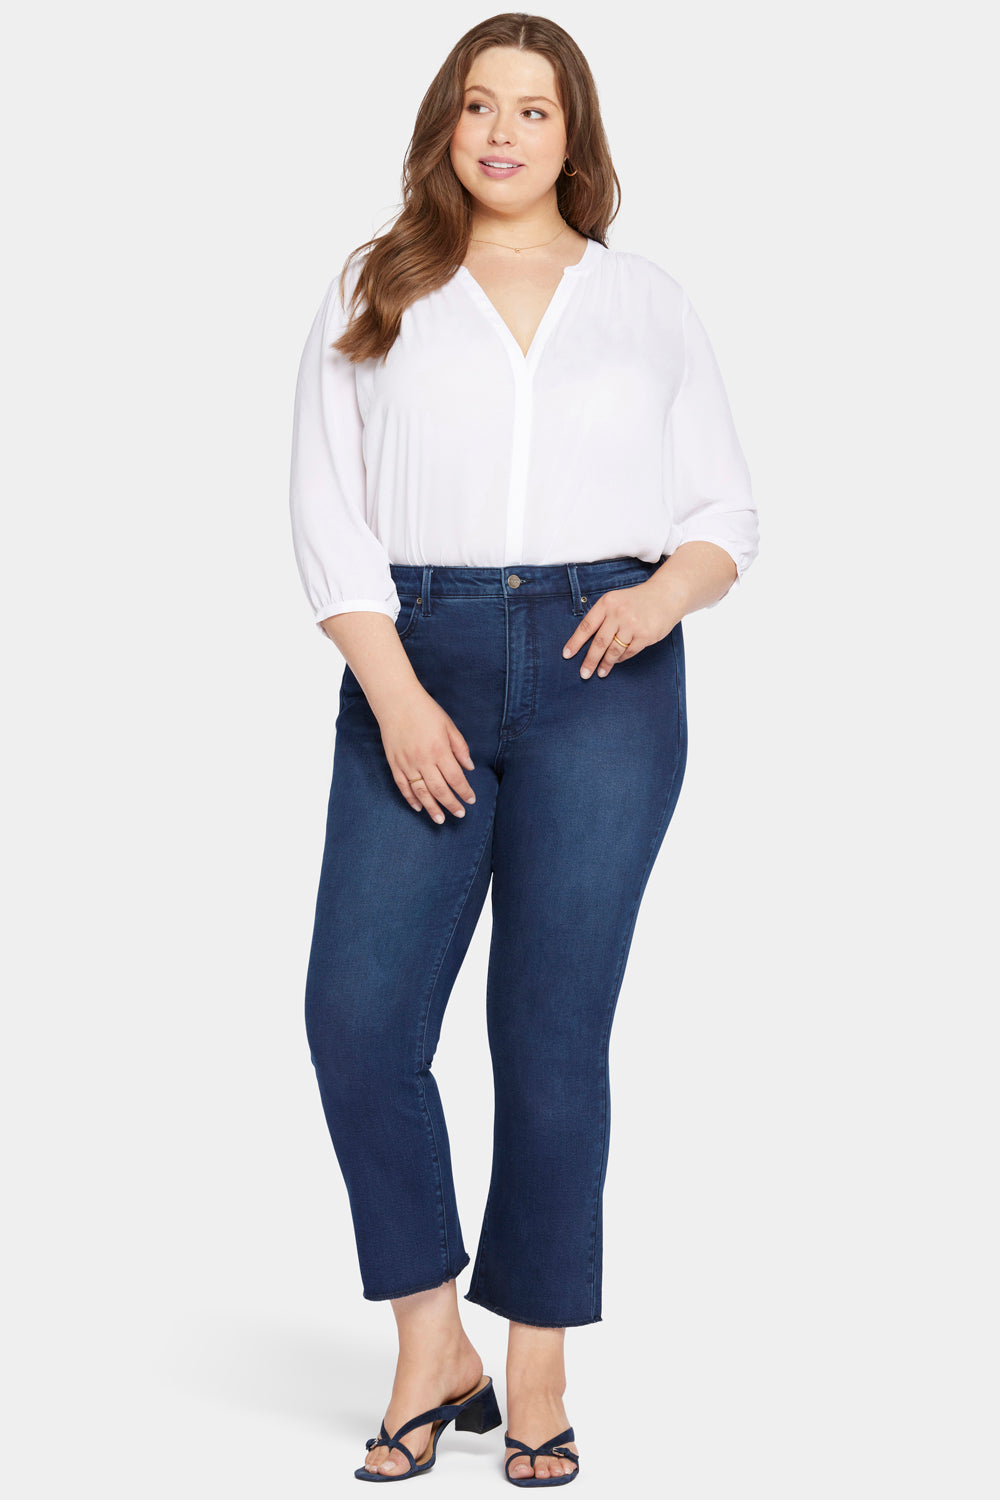 NYDJ Slim Bootcut Ankle Jeans In Plus Size With High Rise And Frayed Hems - Facade